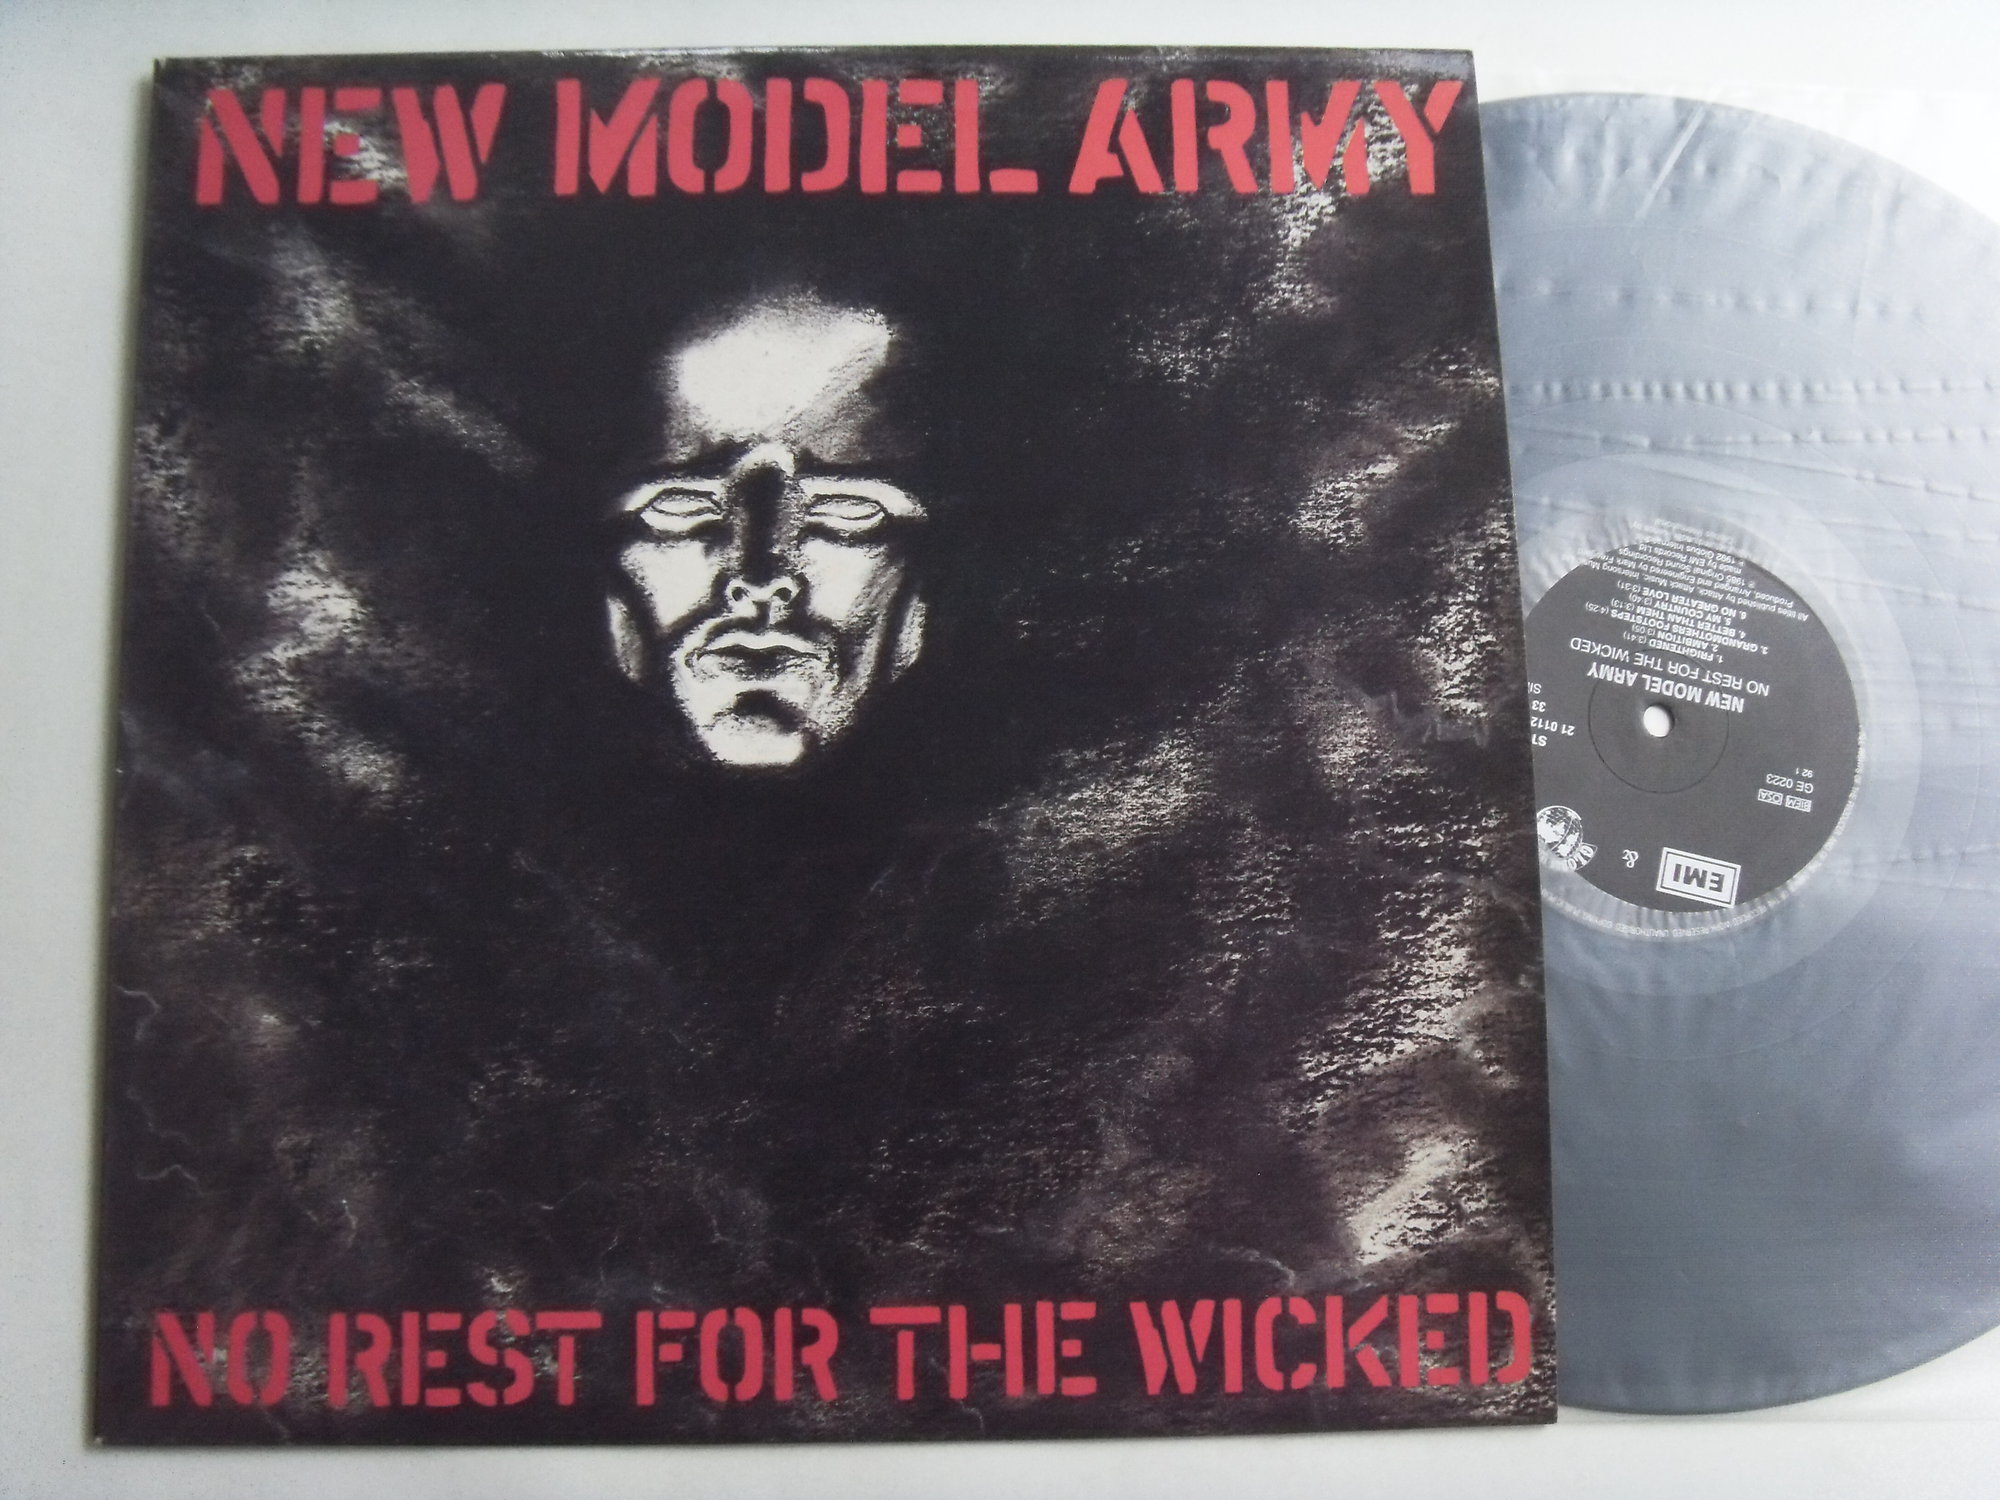 NEW MODEL ARMY No rest for the Wicked